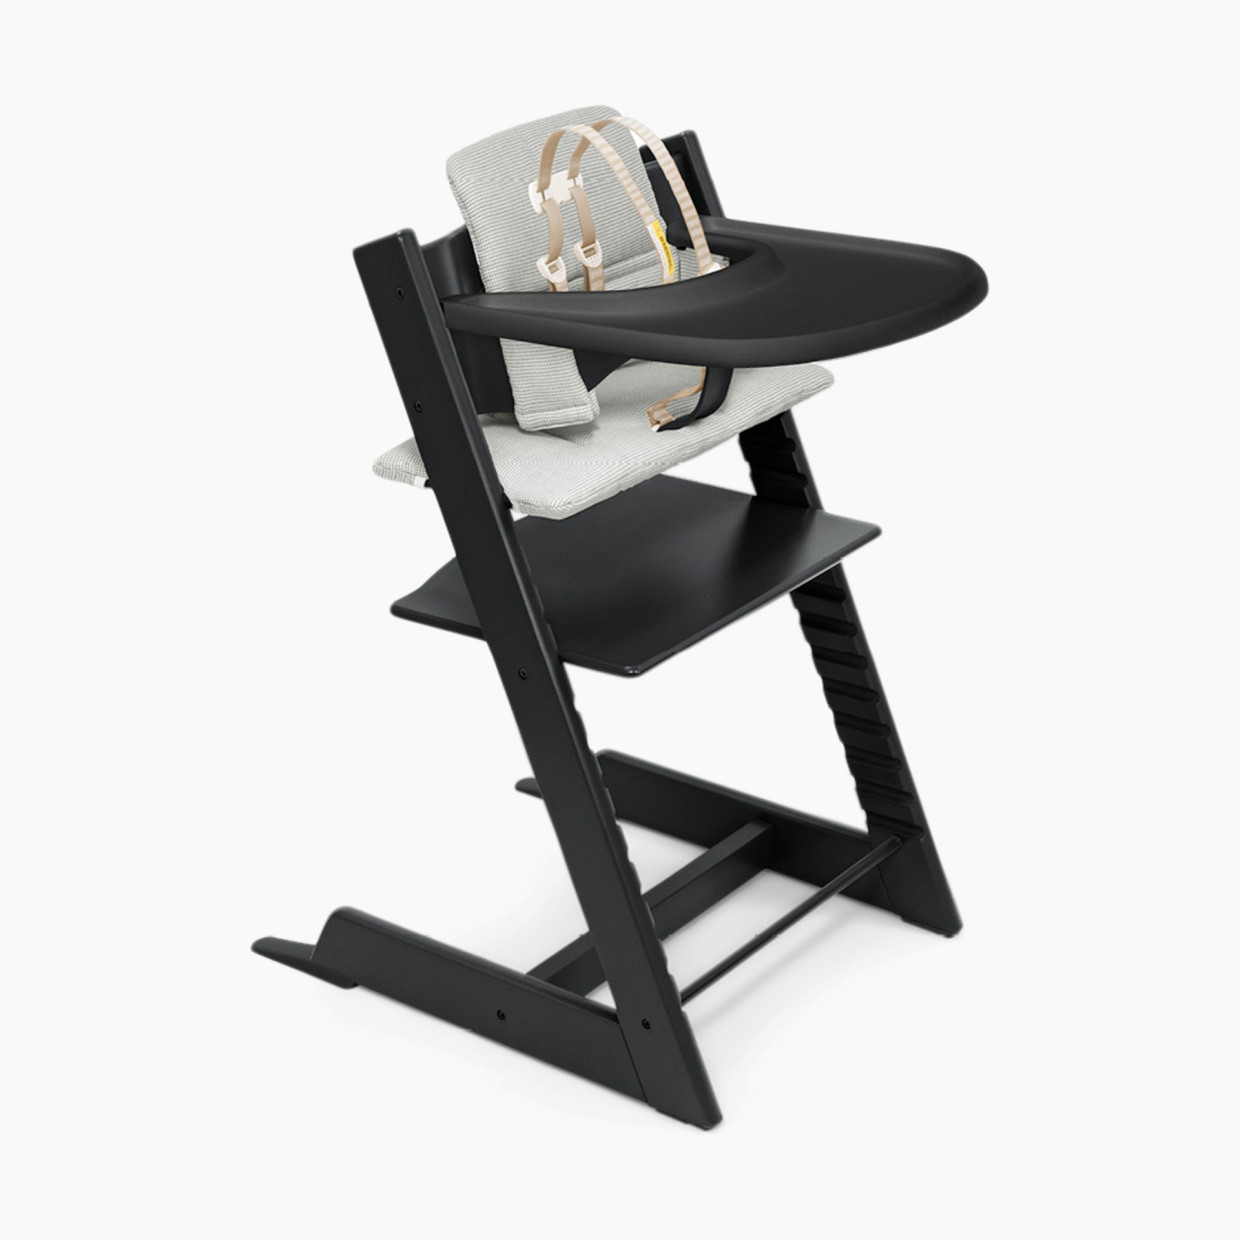 Stokke Tripp Trapp High Chair Complete - Black/Nordic Grey/Black Tray.